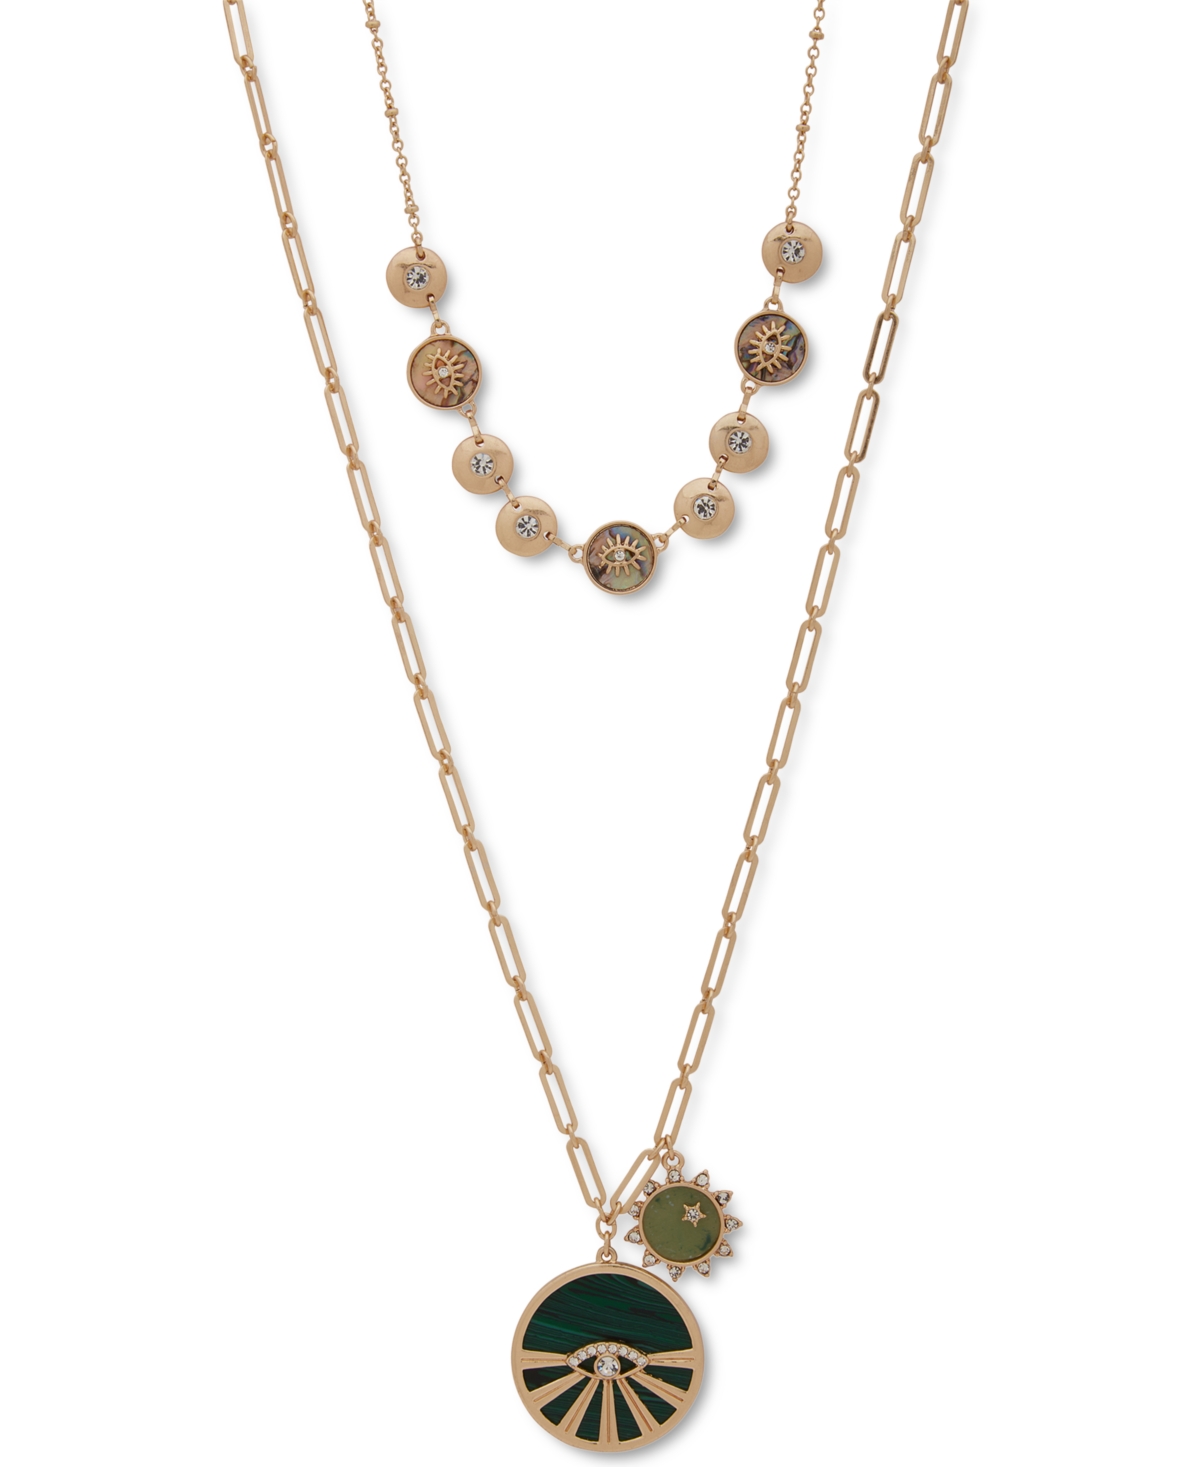 lonna & lilly Gold-Tone Two-Row Long Pendant Necklace, 34"